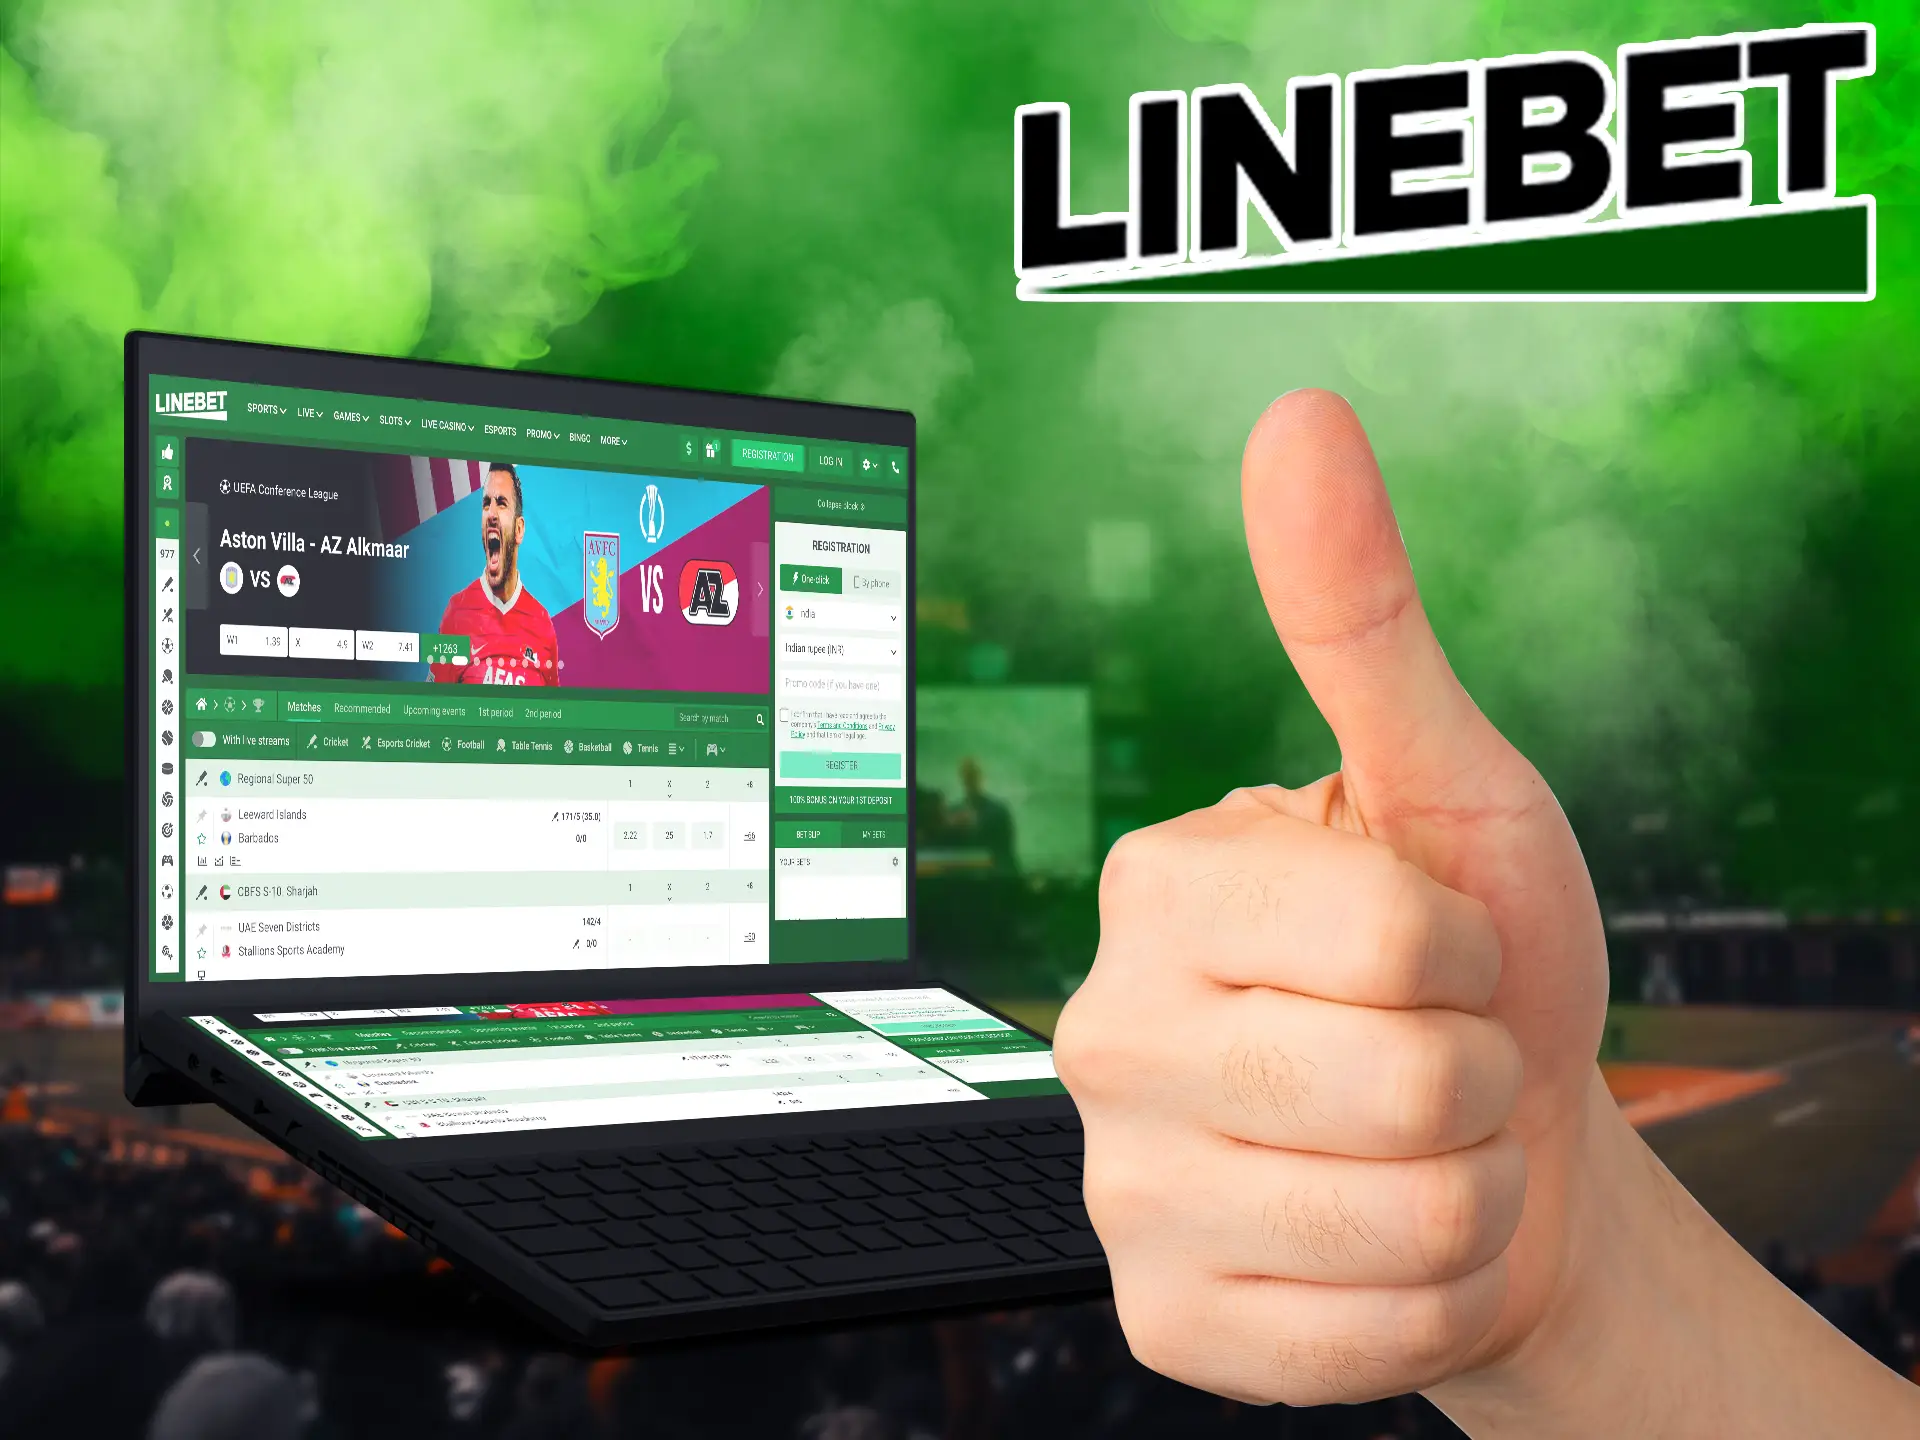 Learn about the strengths of the Linebet app that make it stand out from the competition.